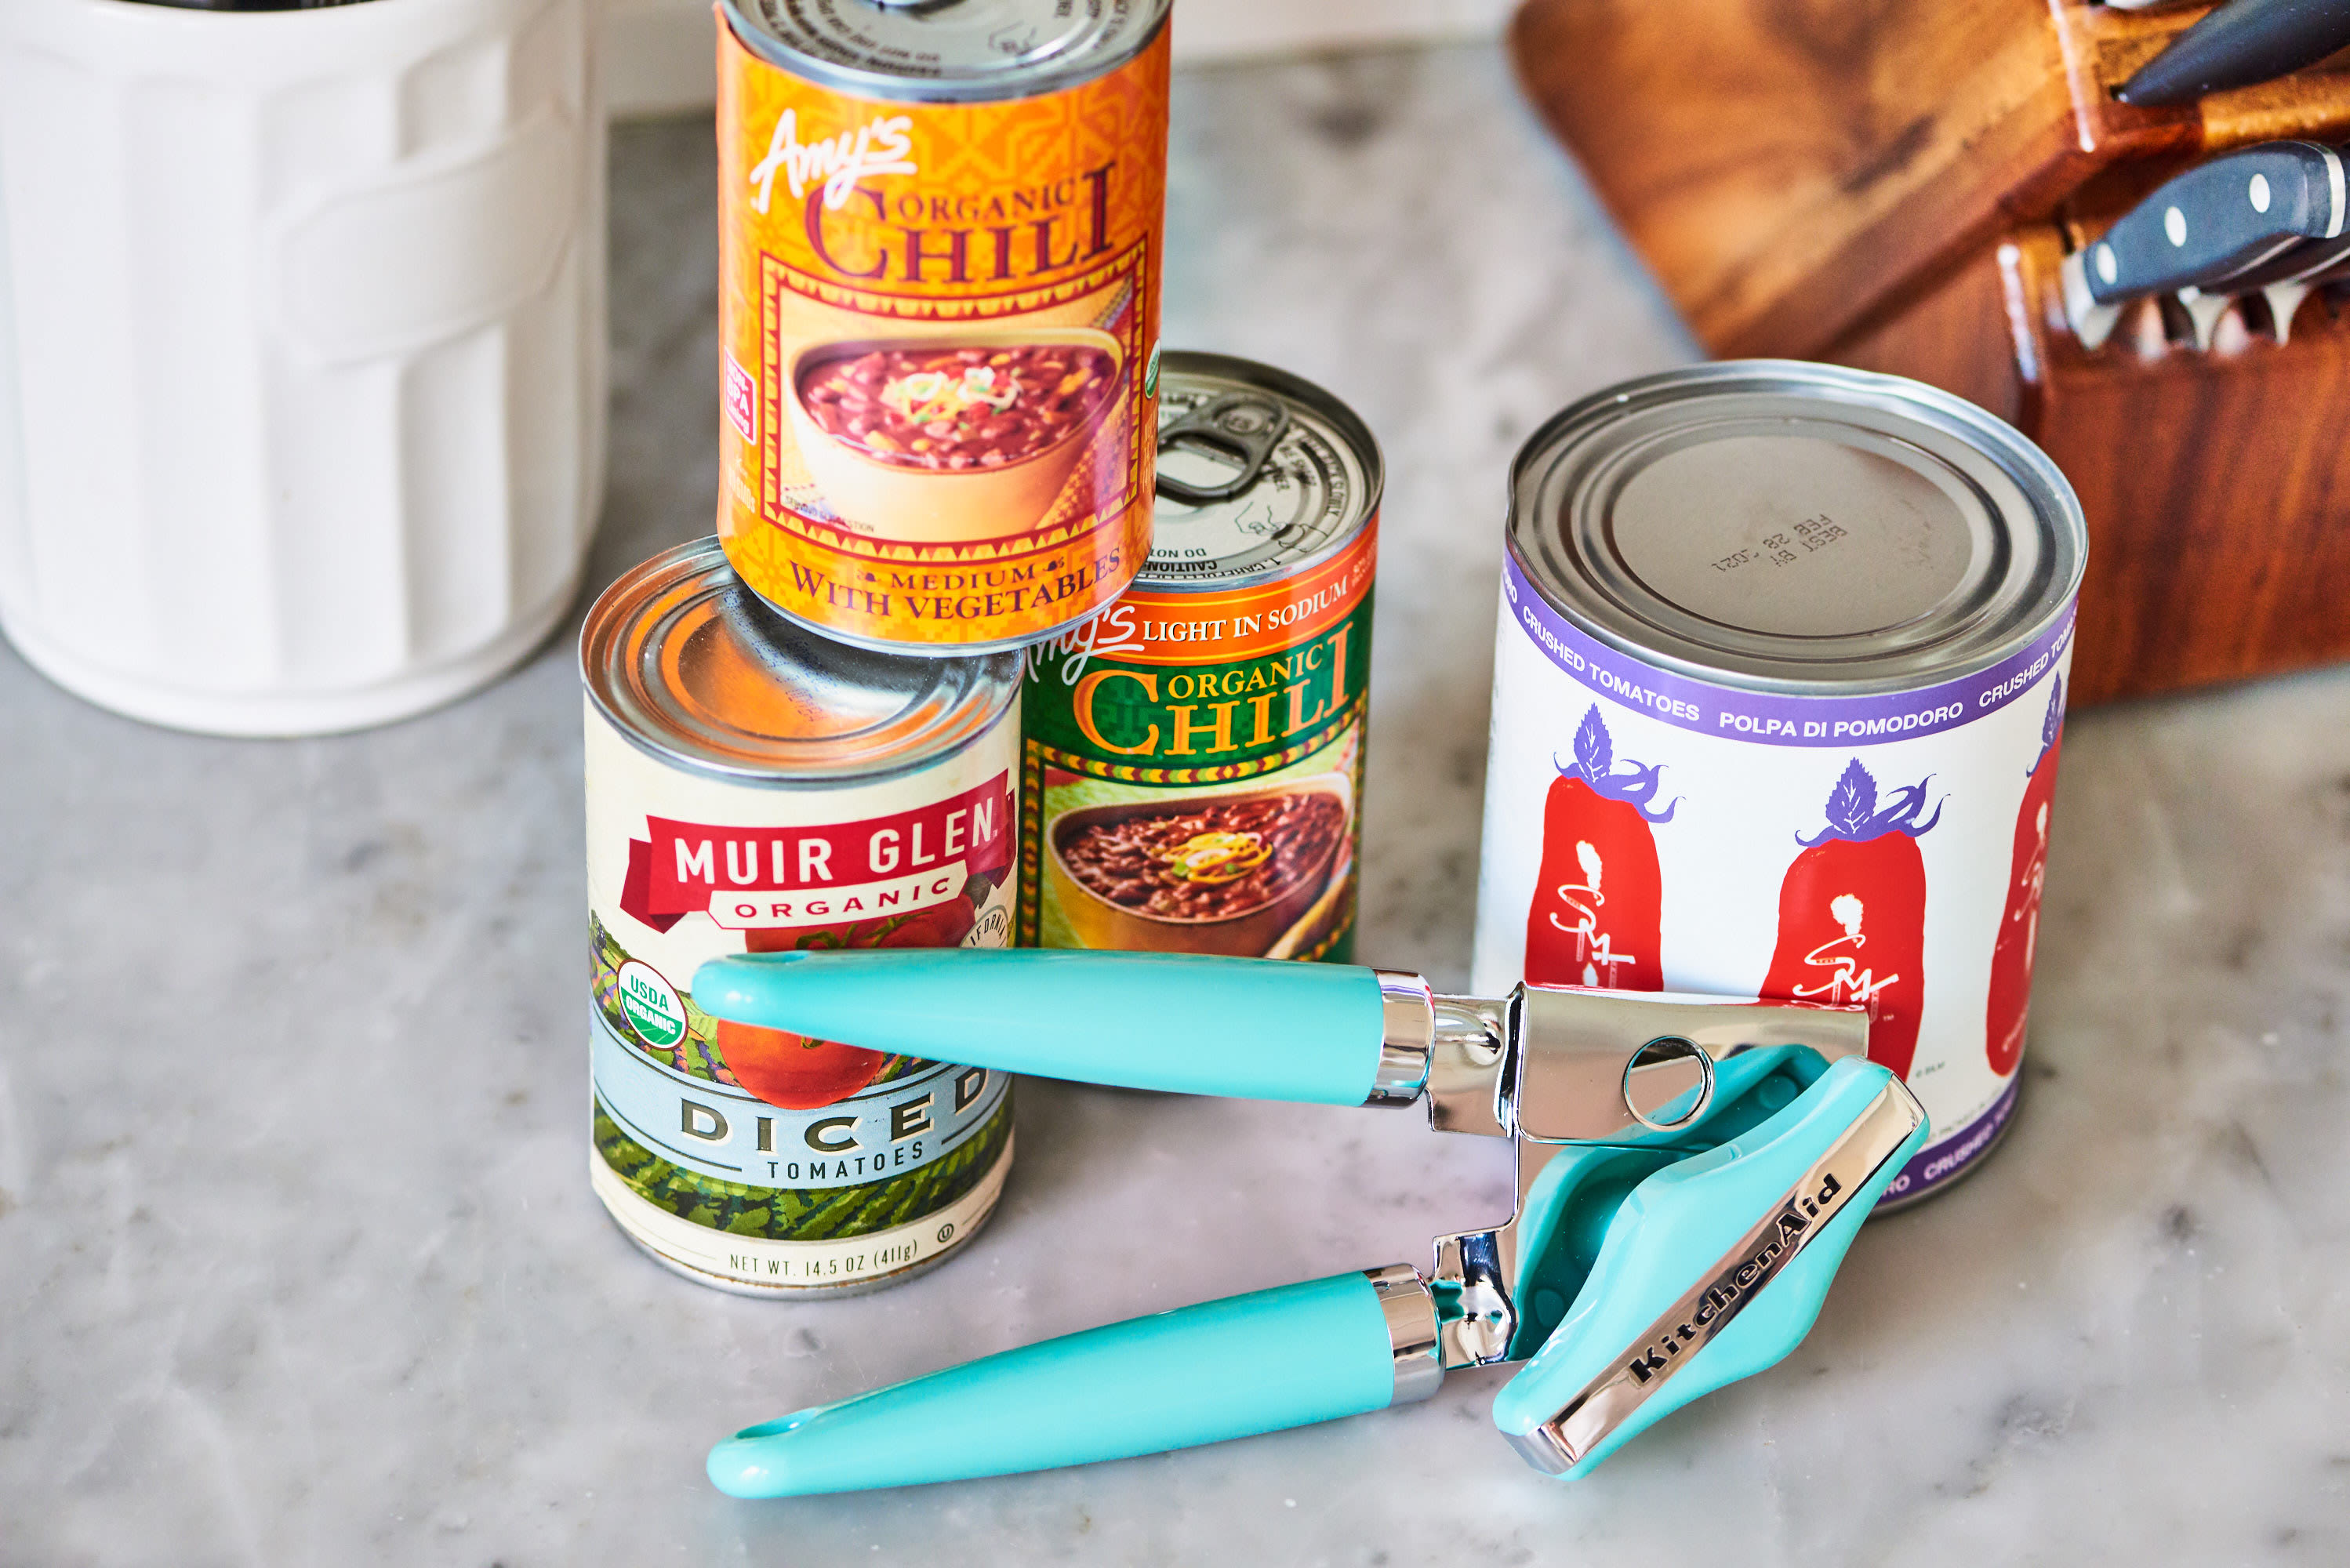 https://cdn.apartmenttherapy.info/image/upload/v1562619750/k/Photo/Lifestyle/2019-07-can-opener-hack-clam-shell-packaging/The-Best-Use-for-Your-Can-Opener_073.jpg